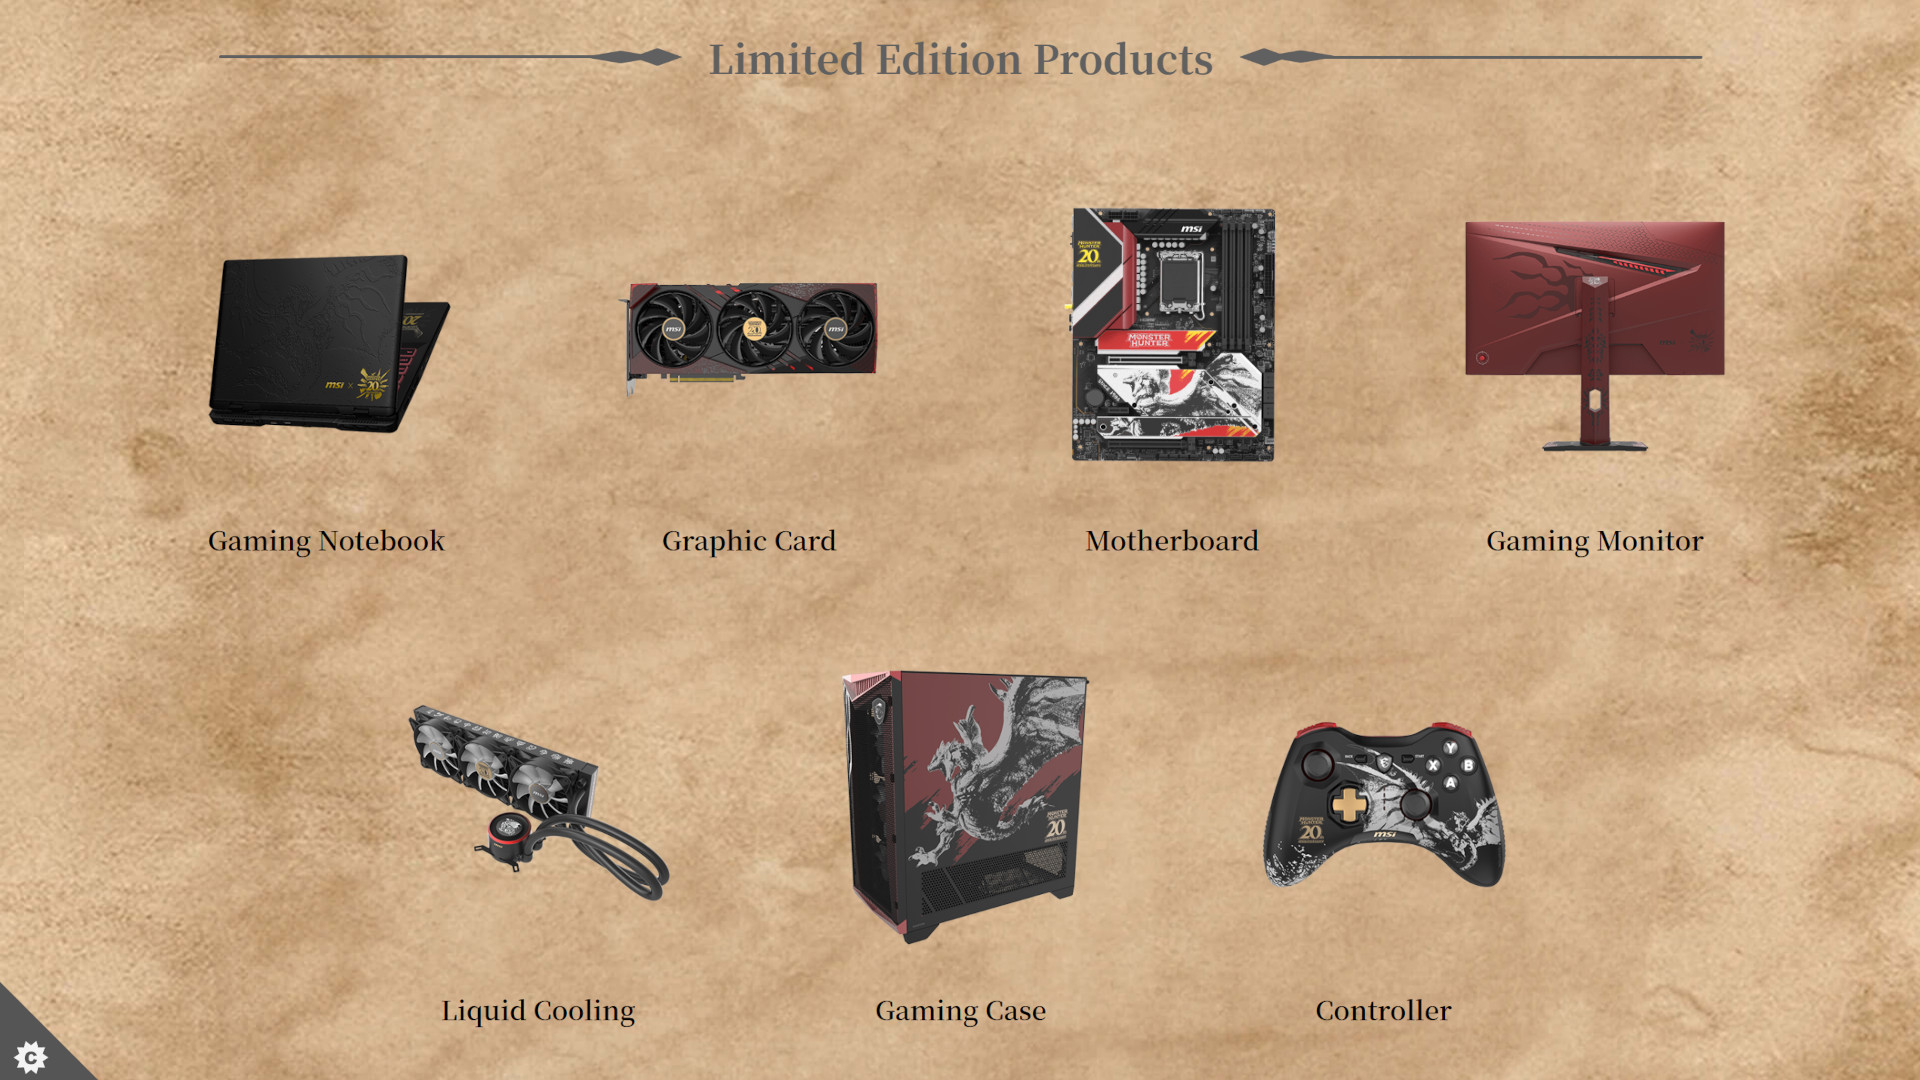 This MSI Monster Hunter limited edition collection is jaw-dropping